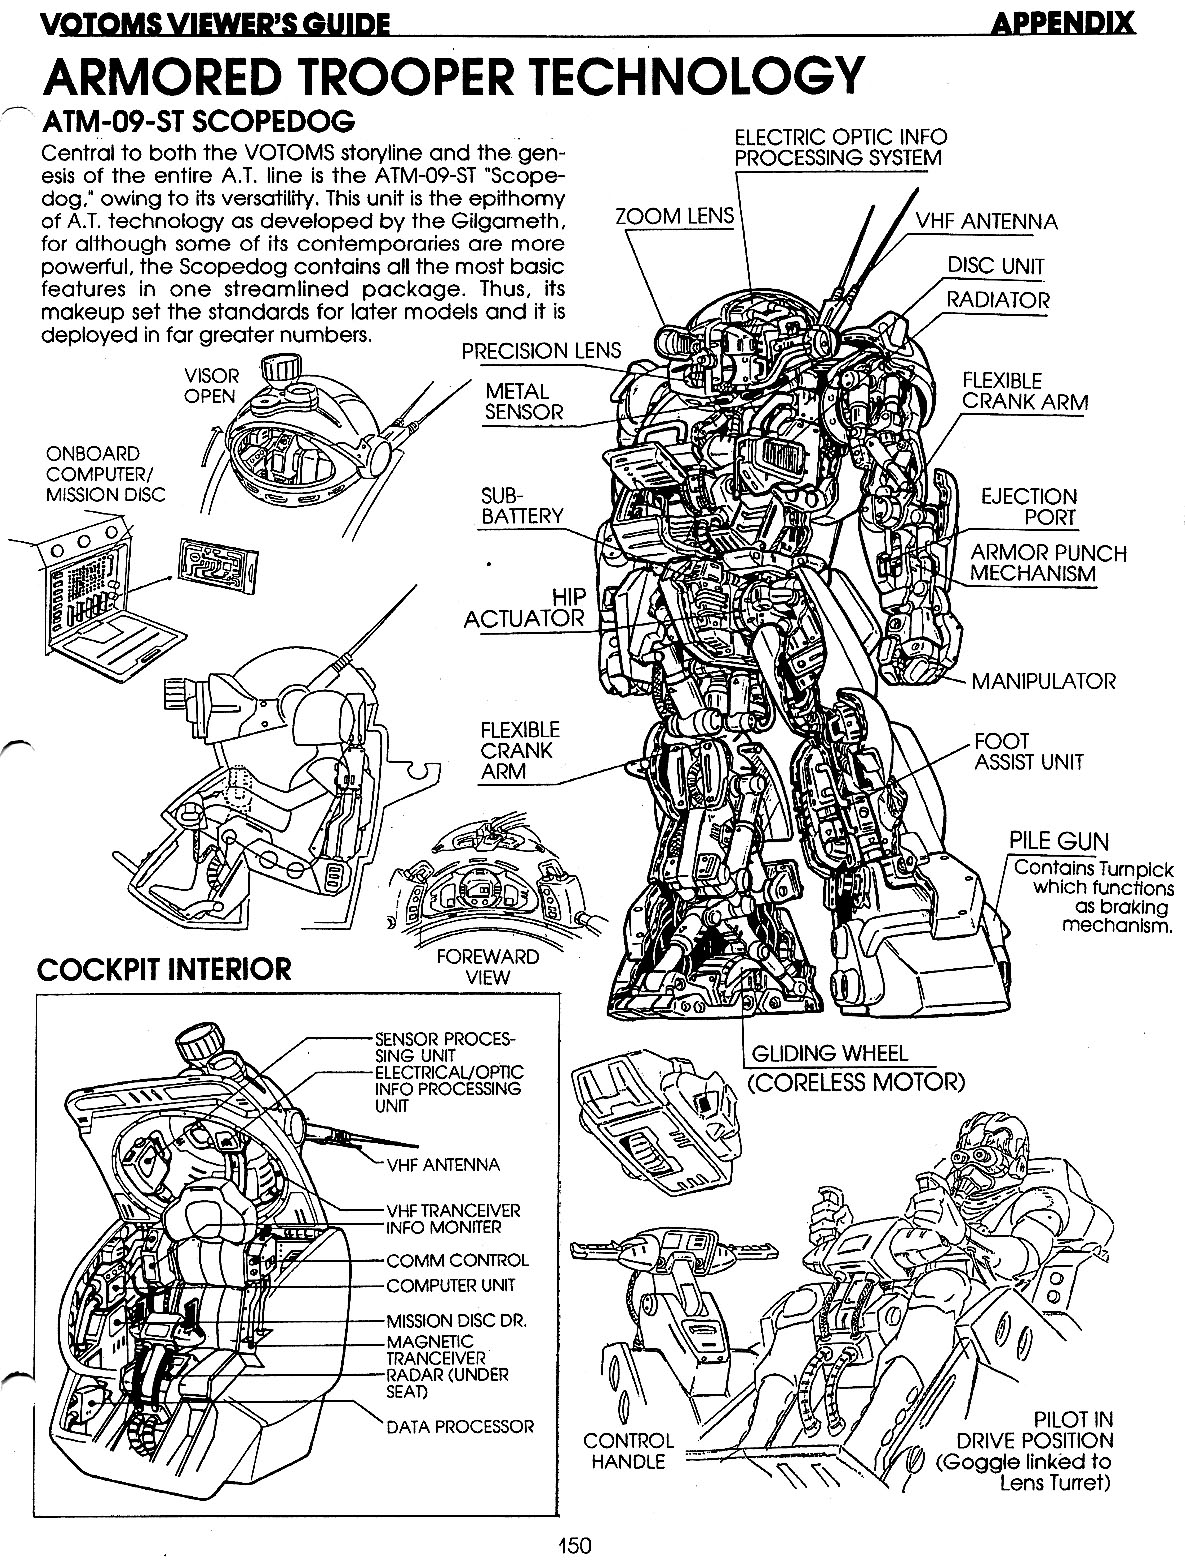 VOTOMS Viewing Guide 150